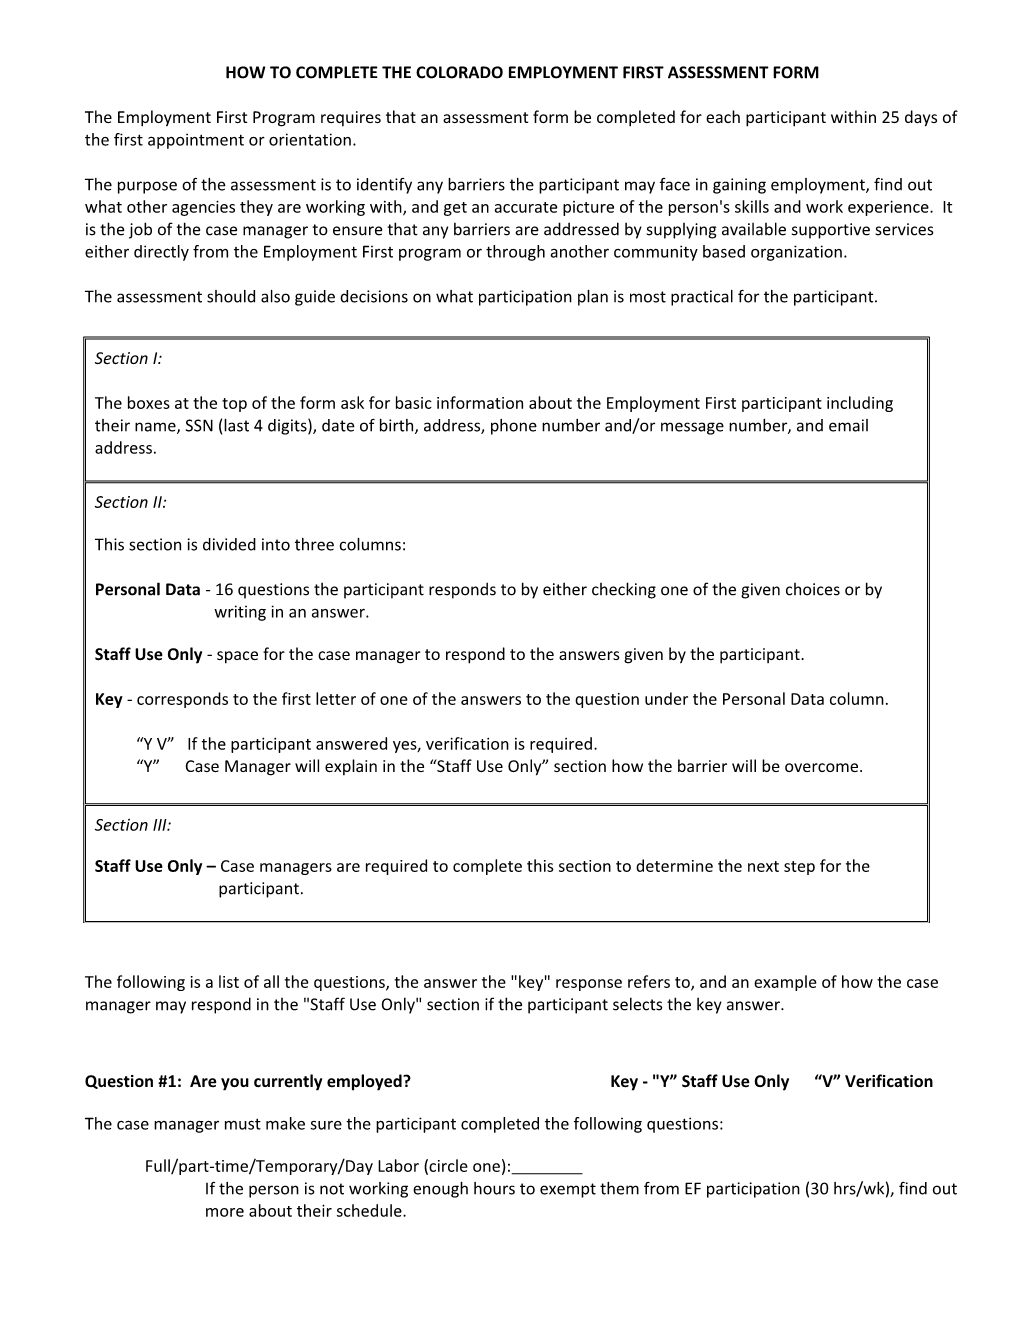 How to Complete the Assessment Form